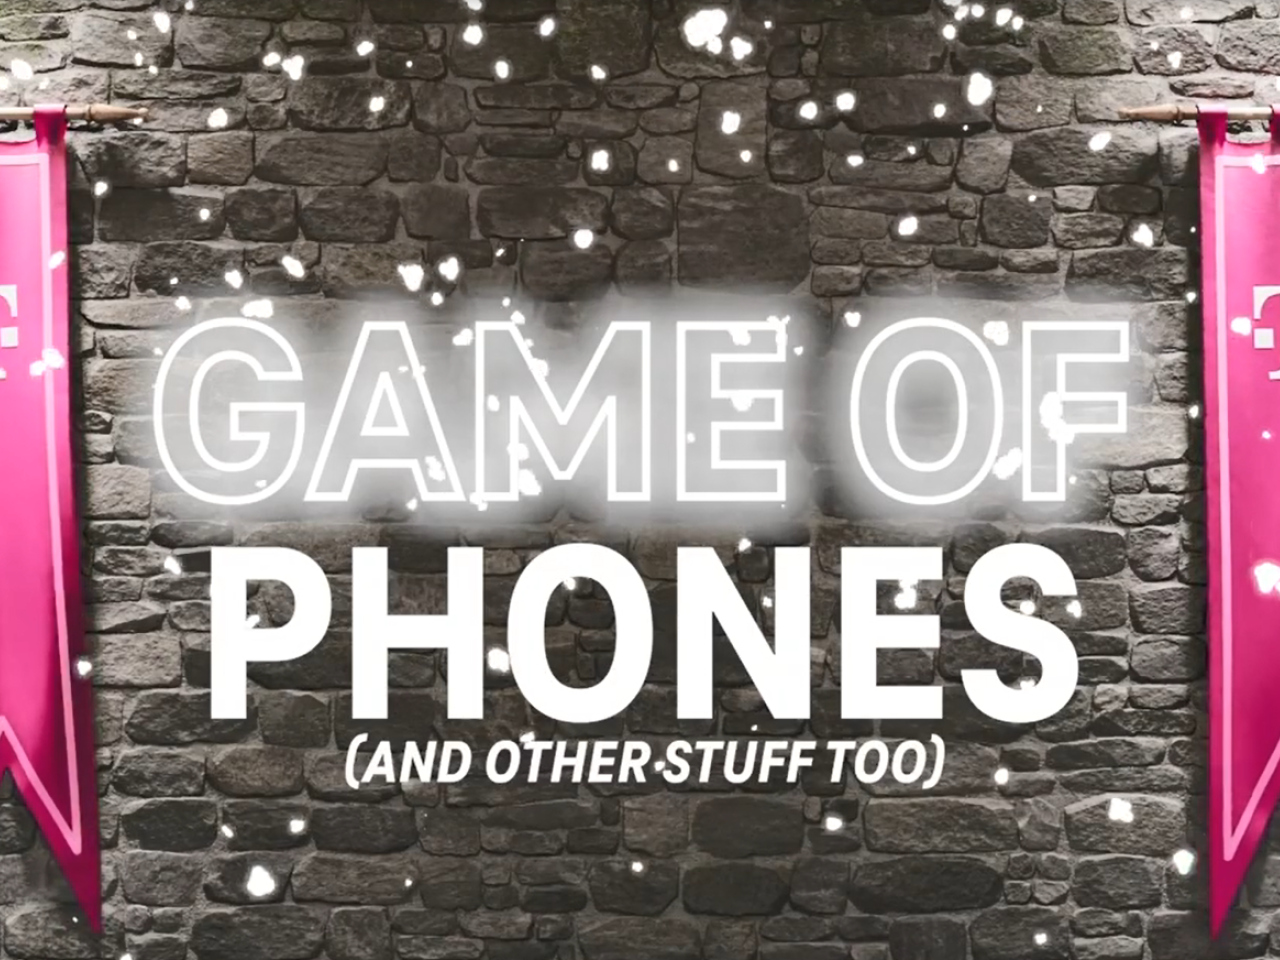 Check out the "Magentaverse." "Game of Phones (and other stuff too.)" 